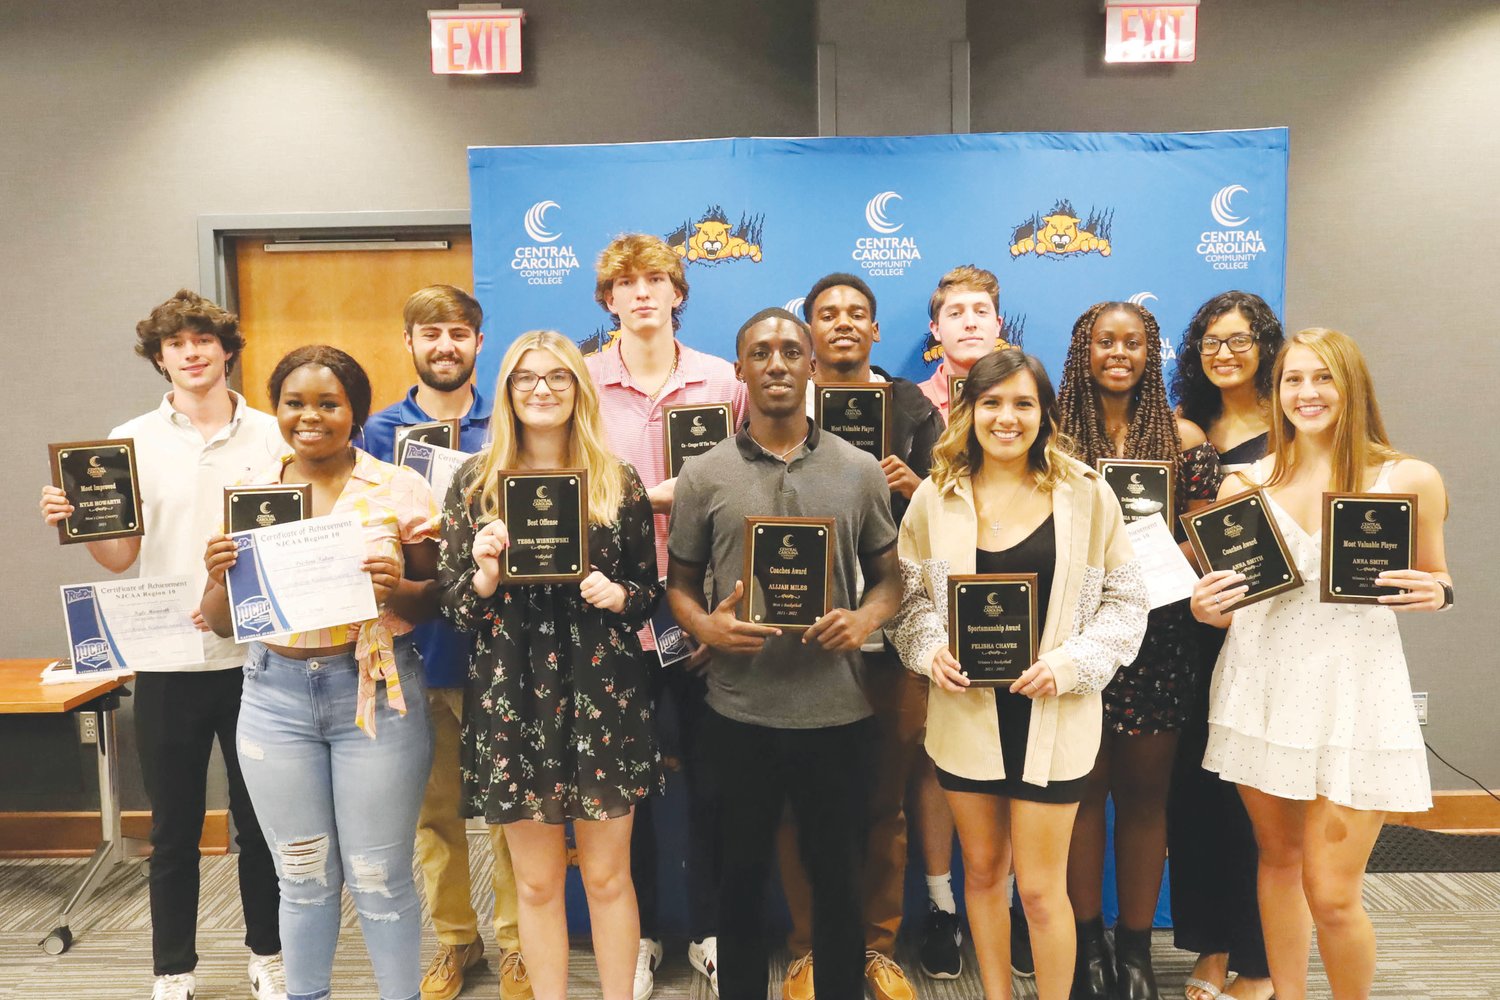 Central Carolina Community College athletic award recipients include, from left to right: first row, Pristina Tabon, Tessa Wisniewski, Alijah Miles, Felisha Chavez and Anna Smith; second row, Kyle Howarth, Cole McBurnett, Tucker Moore, Montell Moore, Derek Gardner, Asia Waiters and Kayle Mejia. Award recipients not pictured include Wesley Case, Preston Cox, Britt Lehman, Demarcus McLaurin, Noah Ritch and Bonnie Thompson.